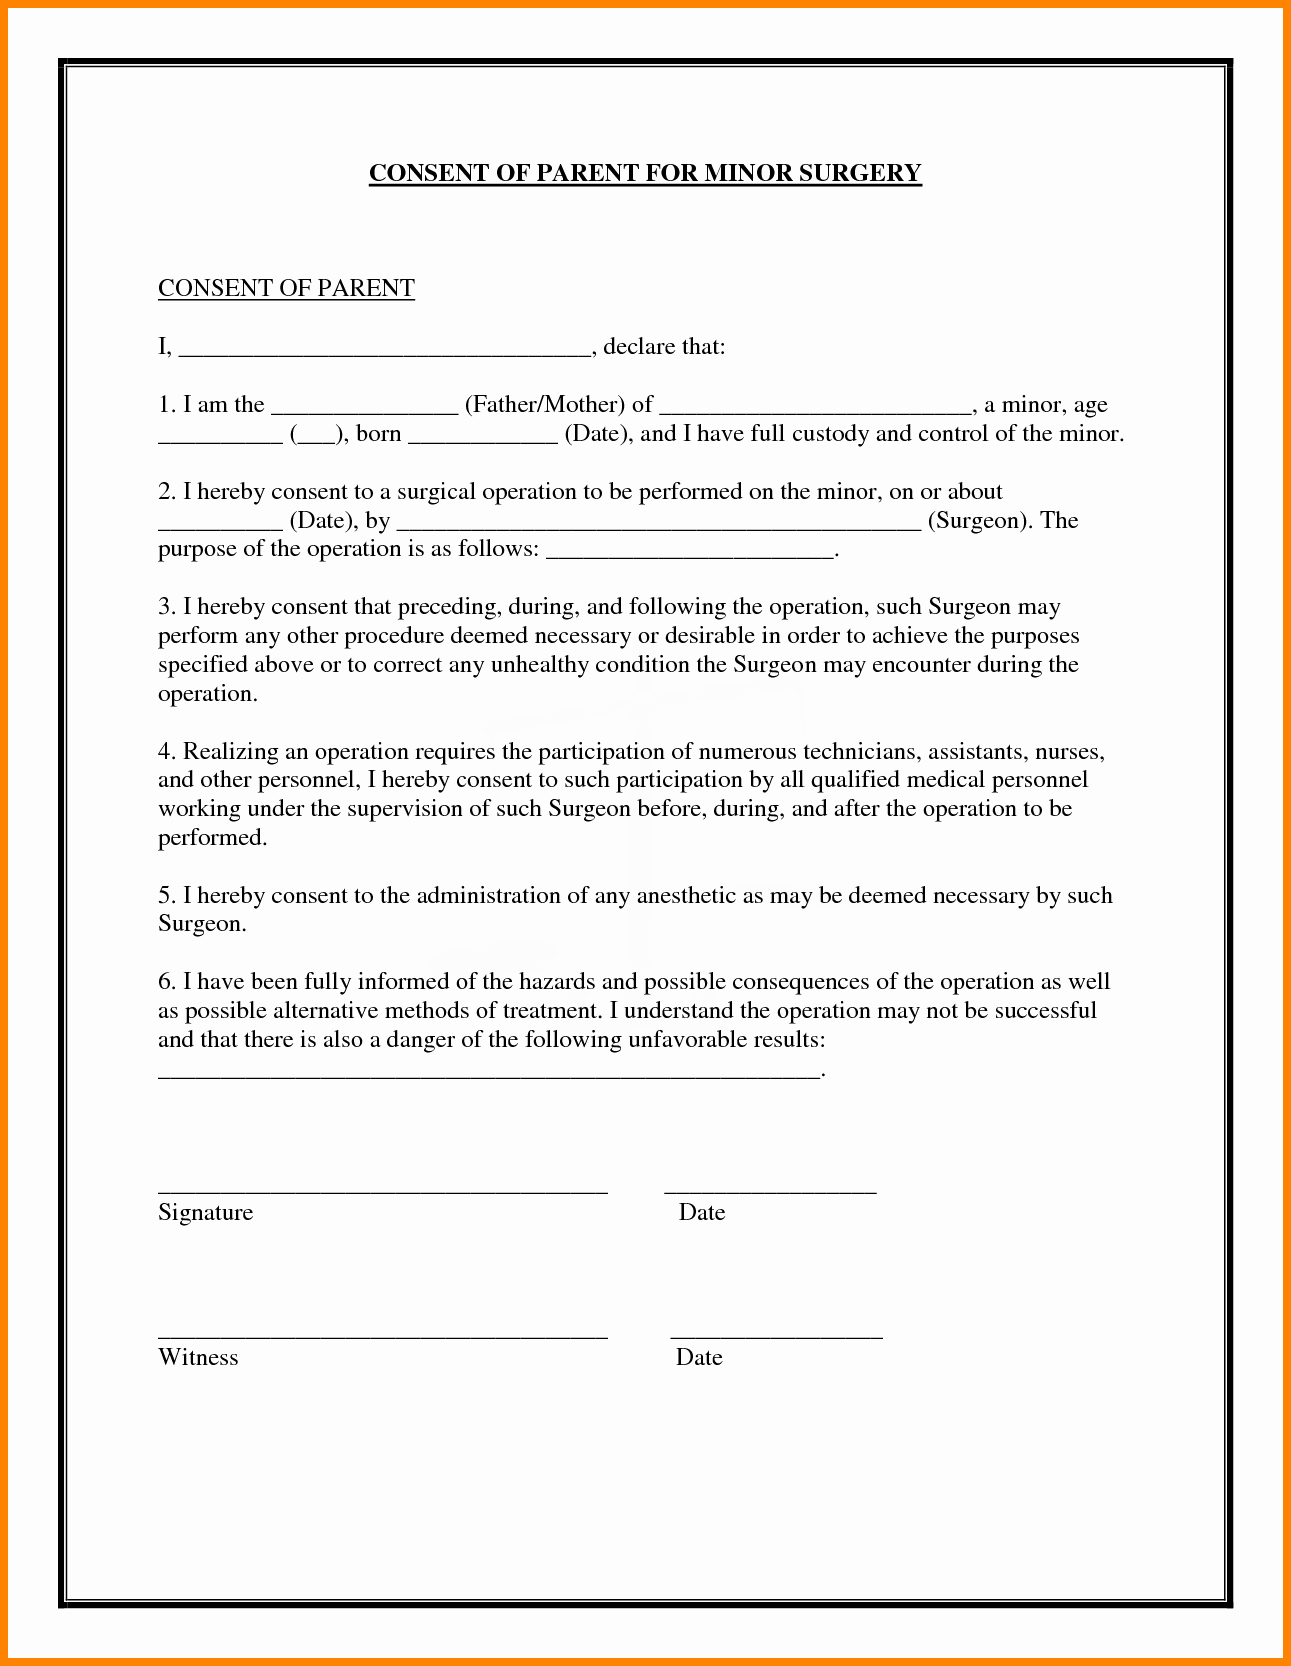 Video Consent form Template Fresh Consent form Driverlayer Search Engine